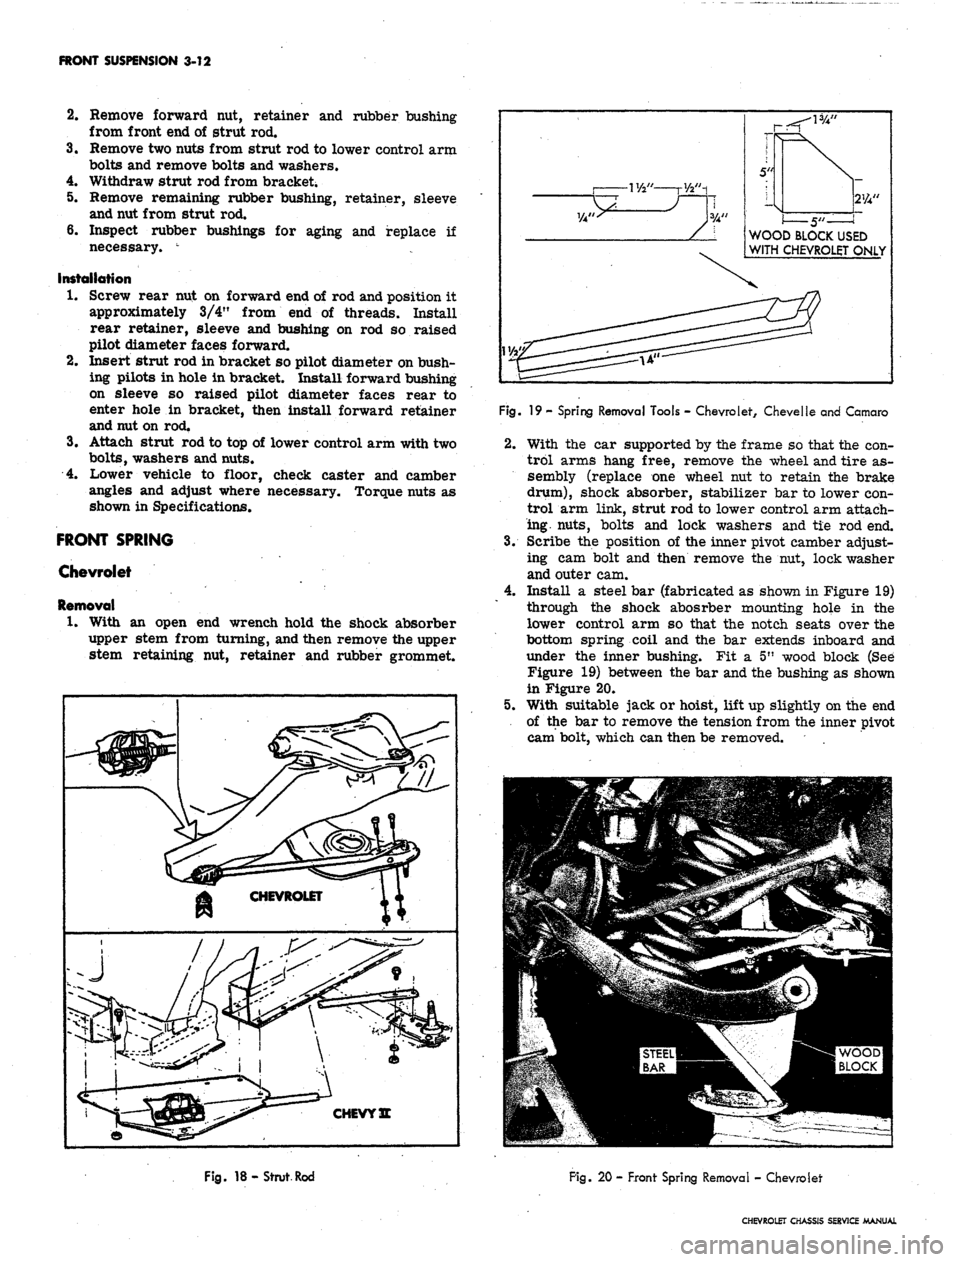 CHEVROLET CAMARO 1967 1.G Chassis Workshop Manual 
FRONT SUSPENSION 3-12

2.
 Remove forward nut, retainer and rubber bushing

from front end of strut rod.

3.
 Remove two nuts from strut rod to lower control arm

bolts and remove bolts and washers.
